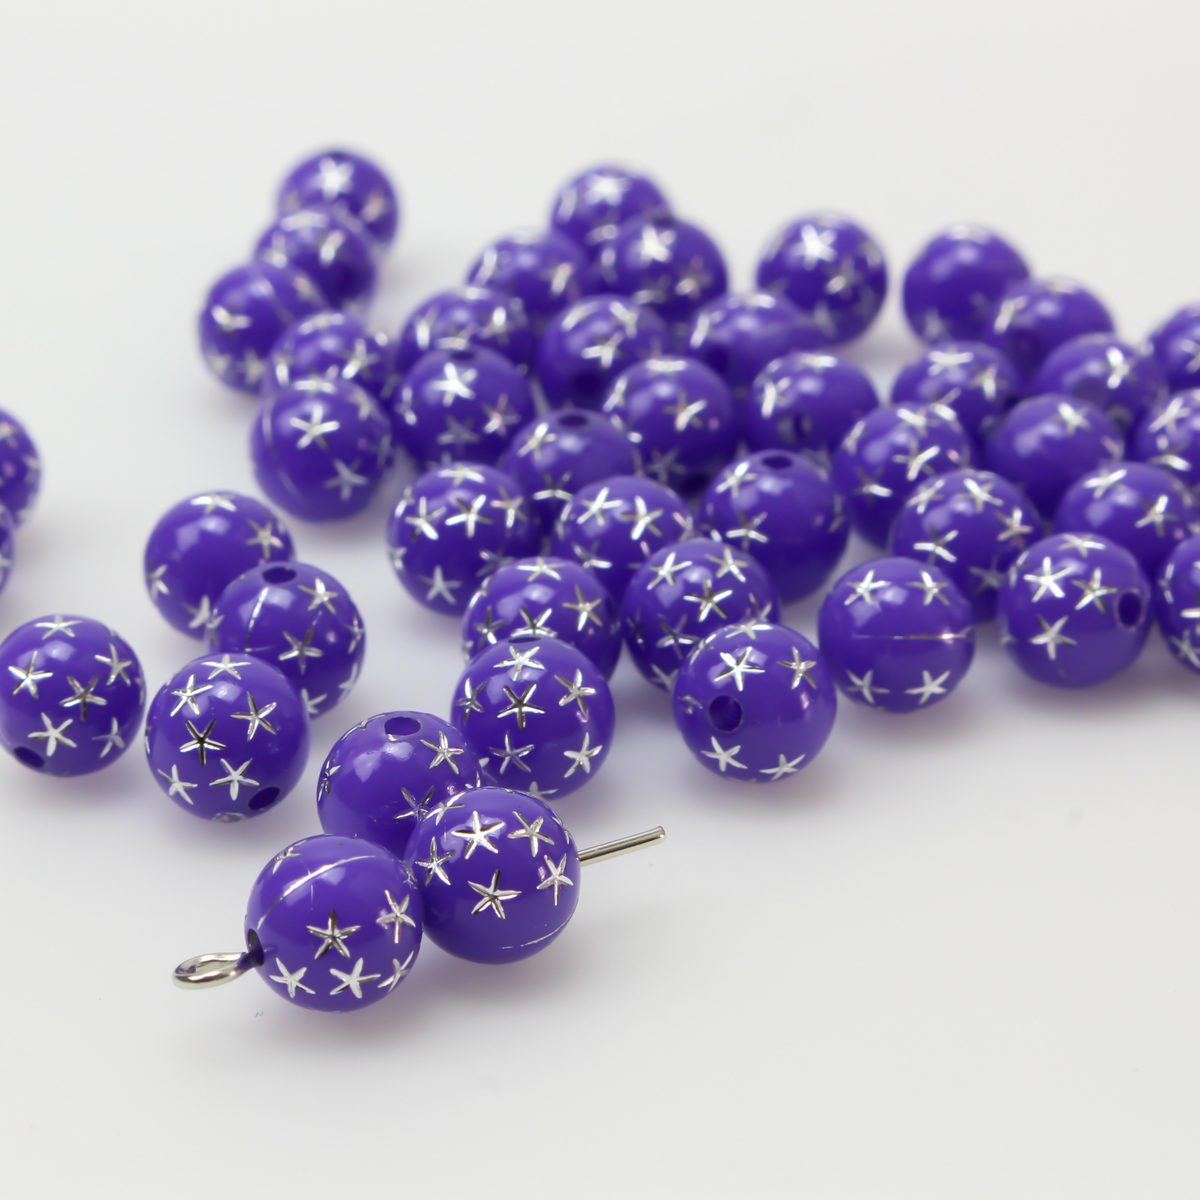 8mm Purple Beads with Celestial Silver Star Design 60pcs for Rosaries –  Small Devotions